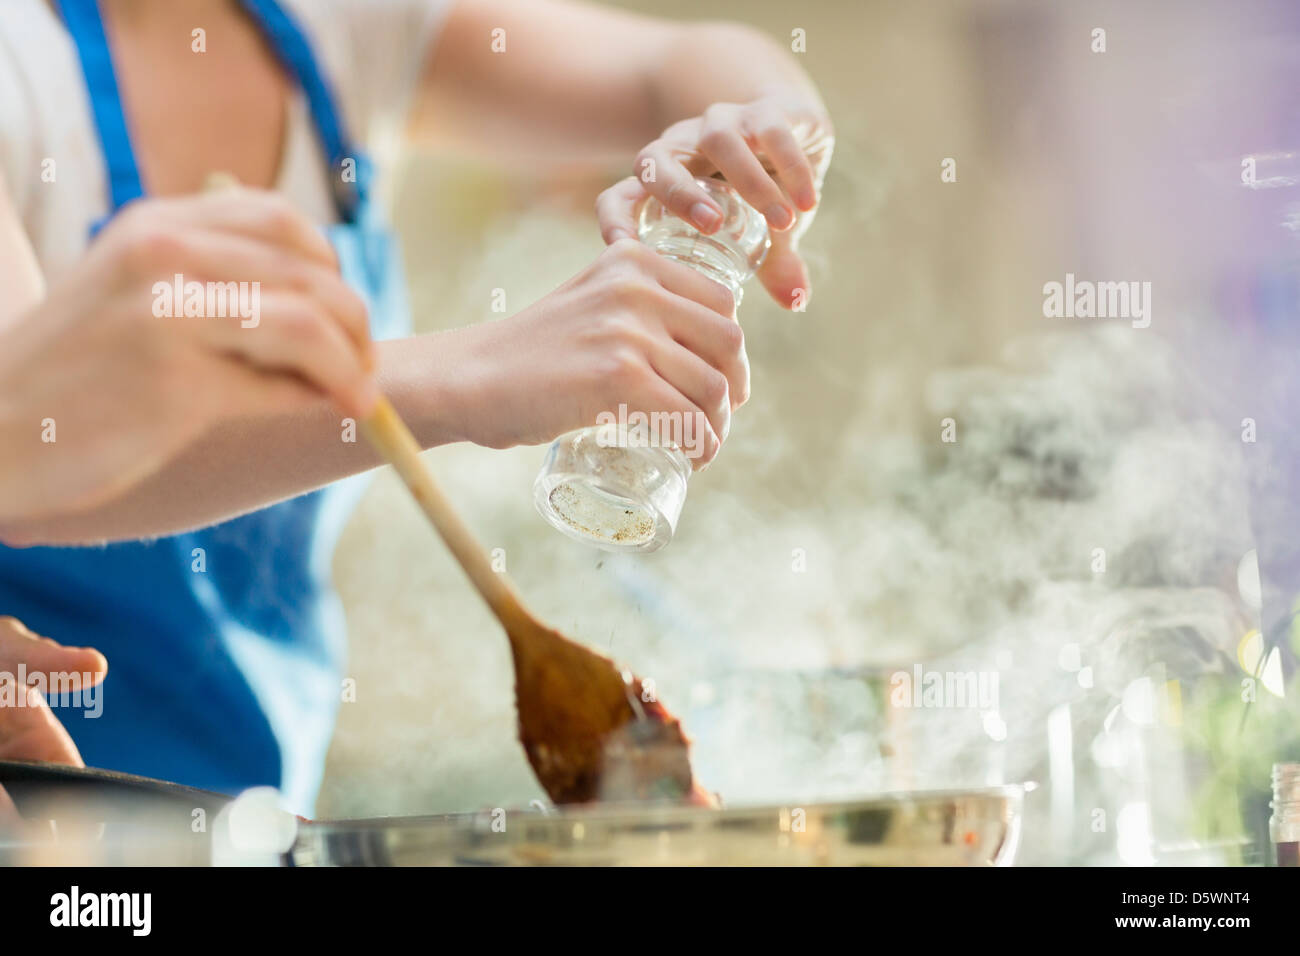 Couple cooking in kitchen Stock Photo